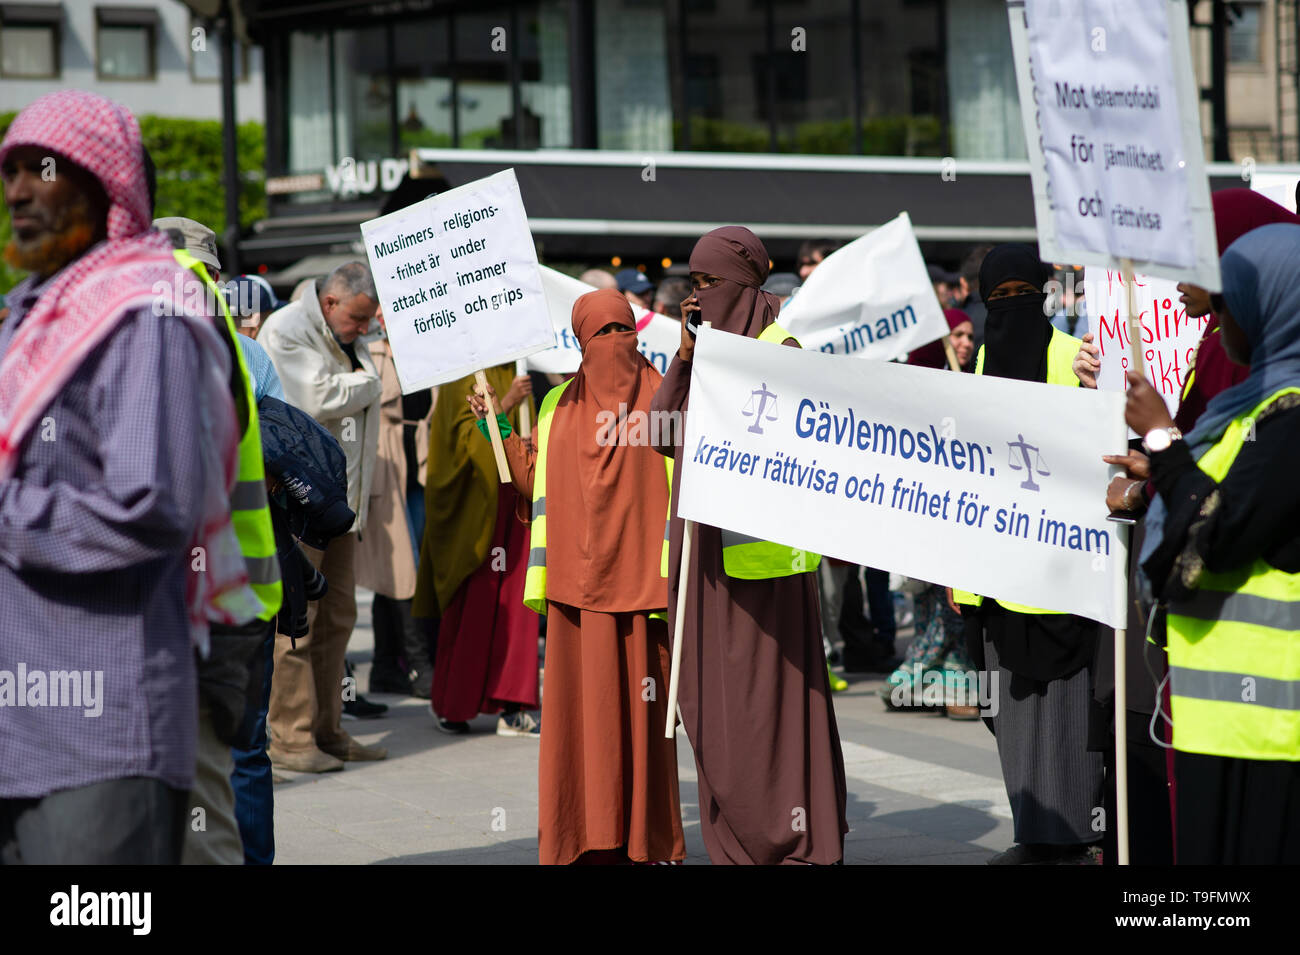 Stockholm, Sweden, May 18, 2019.  Demonstration for detained imams in Sweden.  In recent weeks, imams and Muslim leaders in Sweden have been taken in custody.  Three imams are now in custody: Abo Raad, imam of a mosque in Gävle, Hussein Al-Jibury, imam of a mosque in Umeå, and Fekri Hamad, imam of a mosque in Västerås. Raad's son is also being held. Abdel-Nasser el Nadi, chief executive of Vetenskapsskolan, is the fifth senior member of Sweden's Muslim community to be placed in custody in less than a month.    According to Swedish law, Swedish Security, Säpo, can deport anyone who is not a Swe Stock Photo